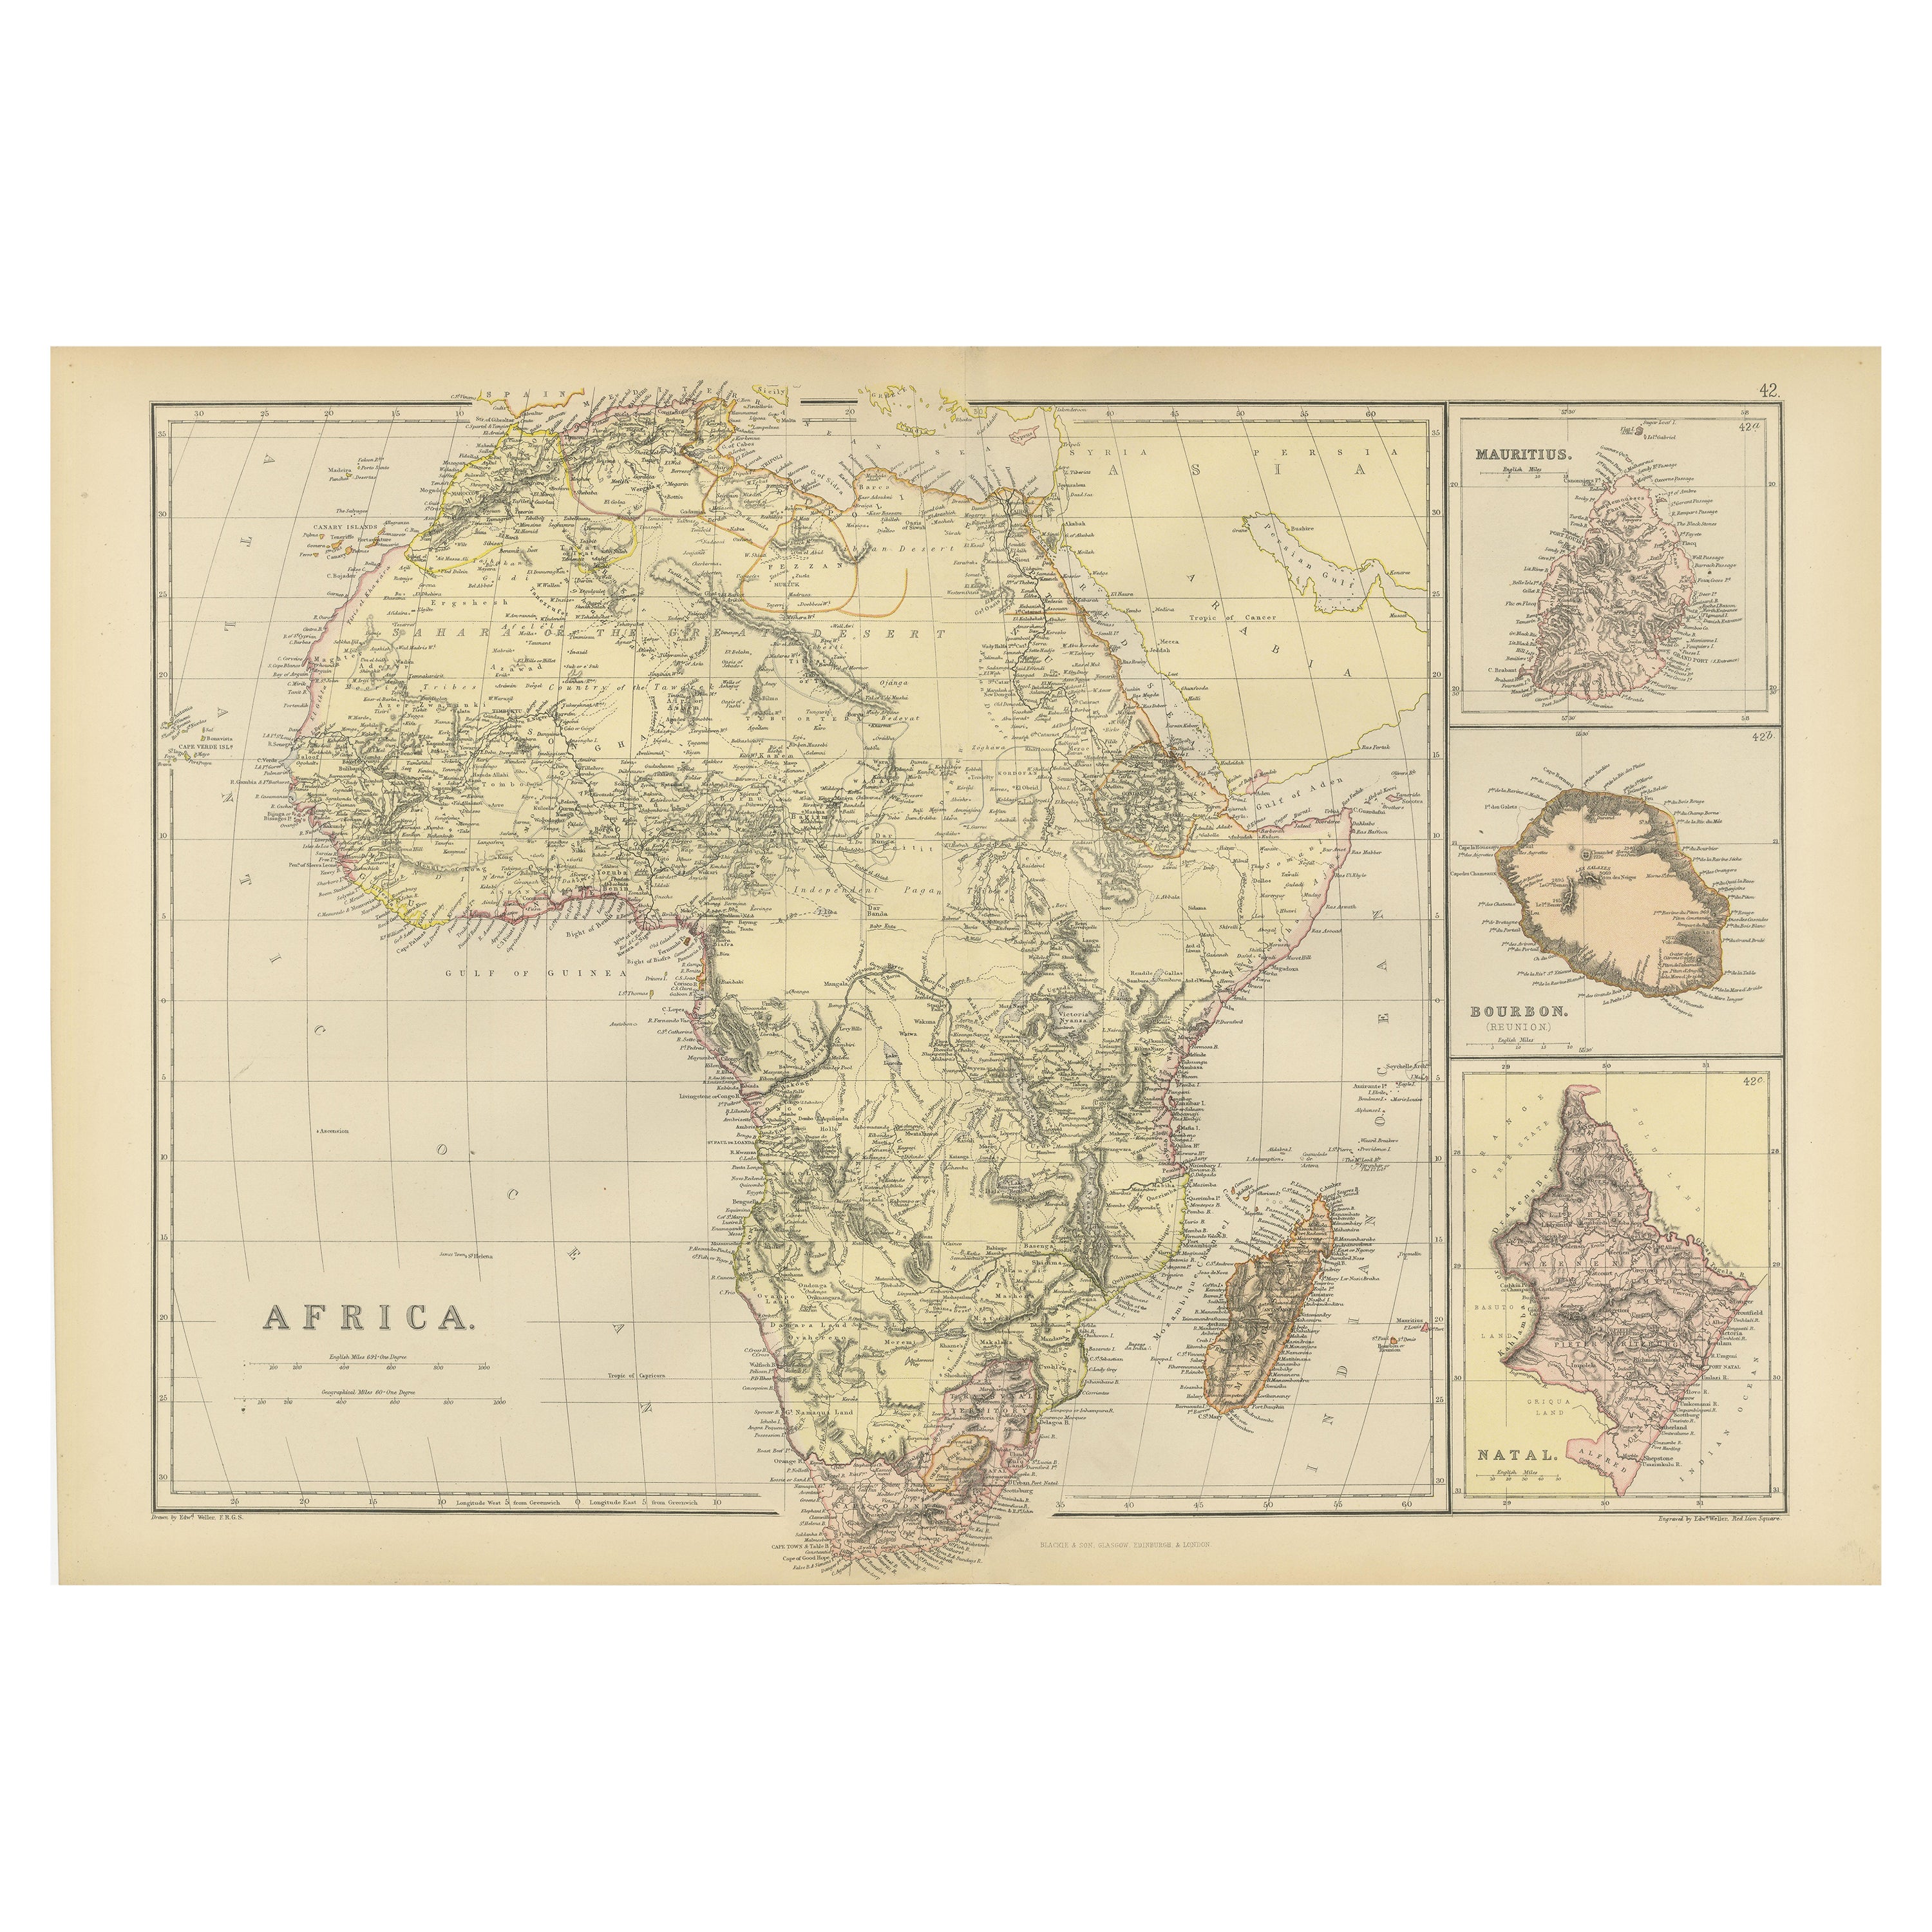 Antique Old Map of Africa with Insets of Mauritius, Reunion and Natal, 1882